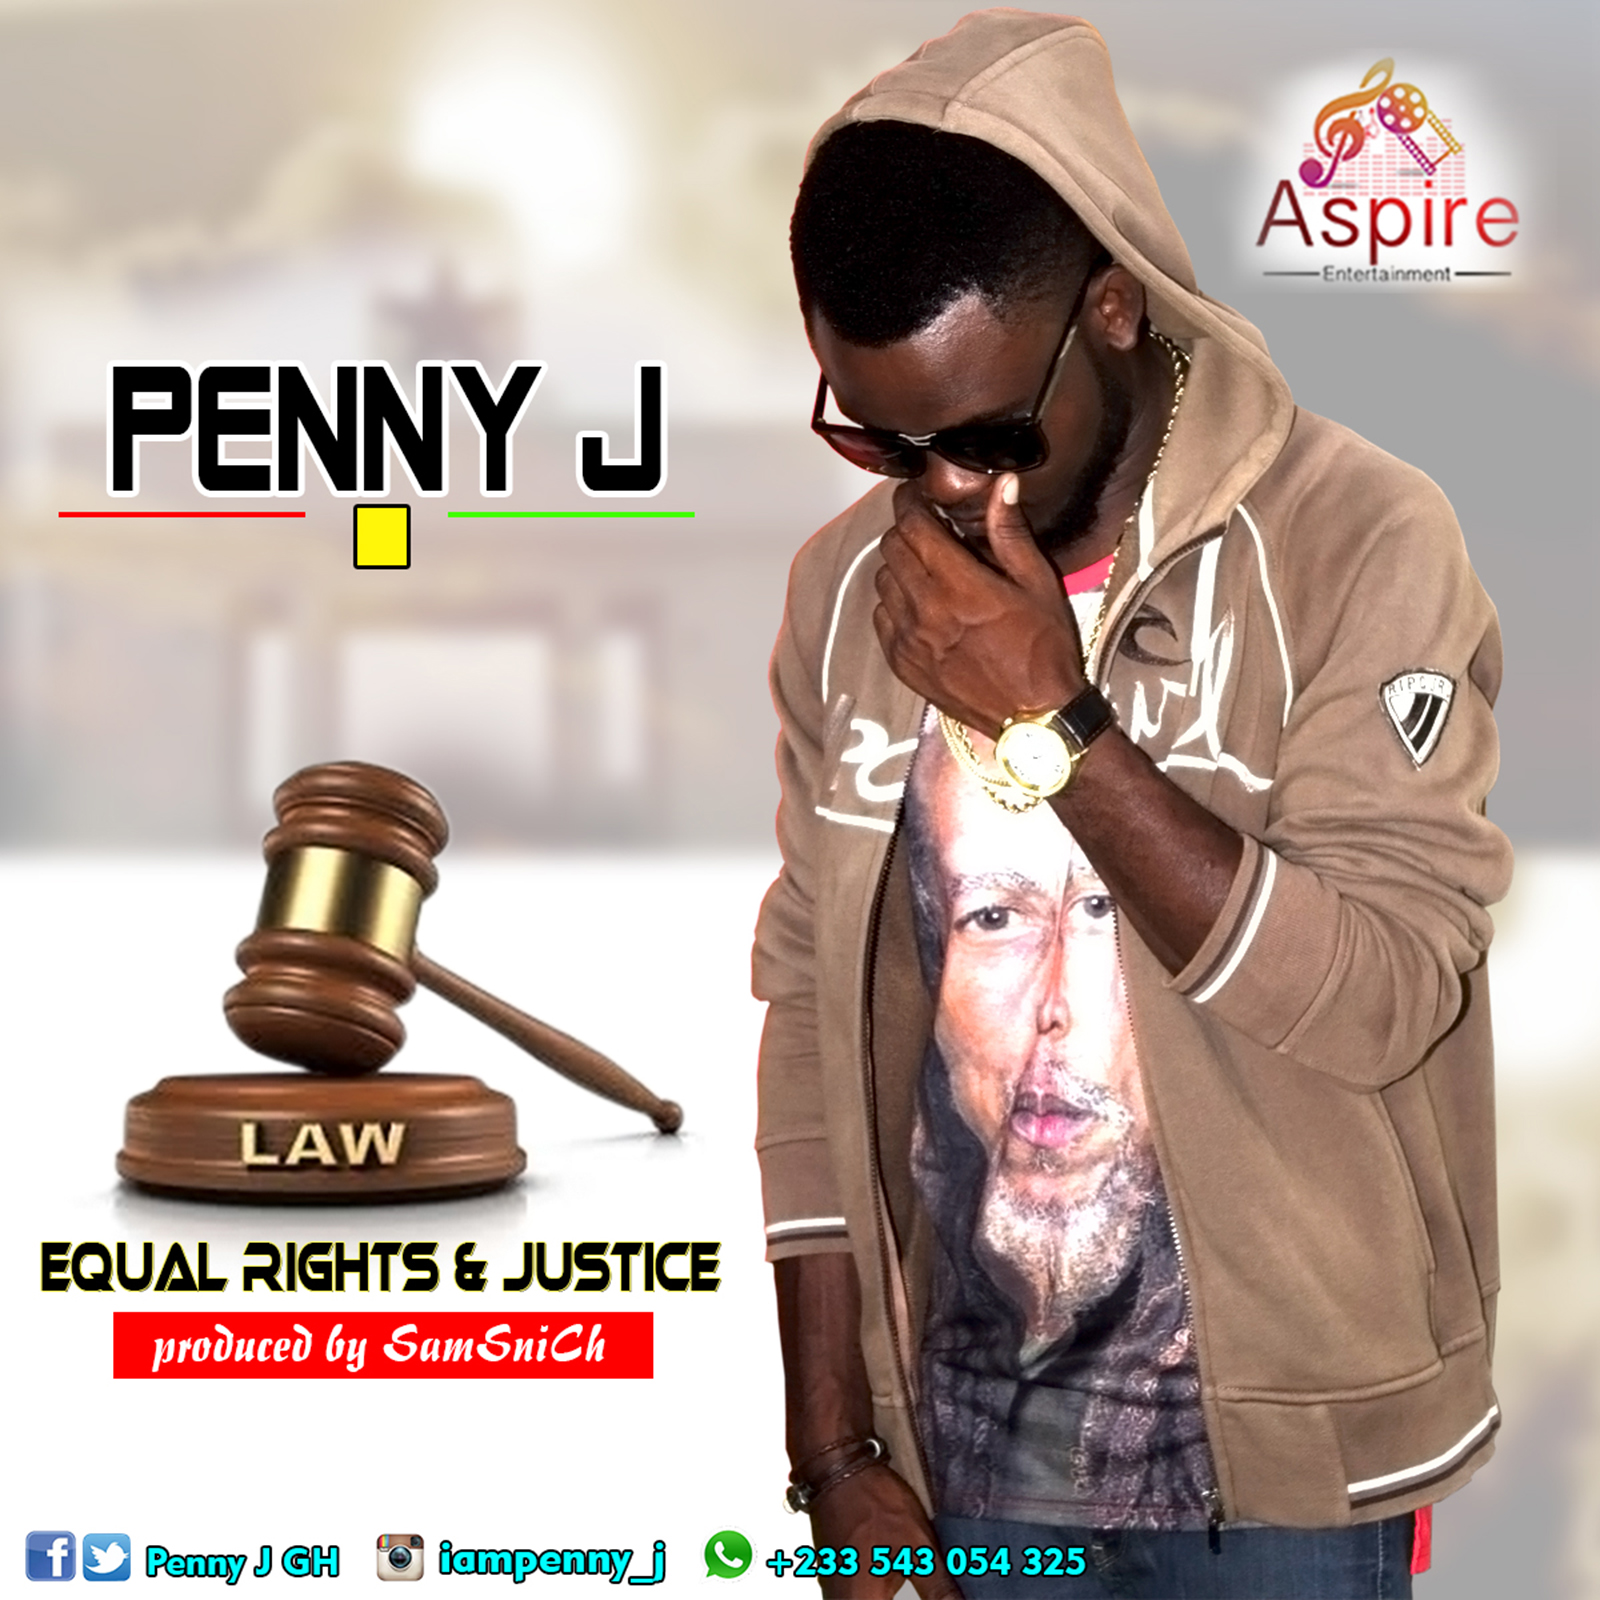 Equal Rights & Justice by Penny